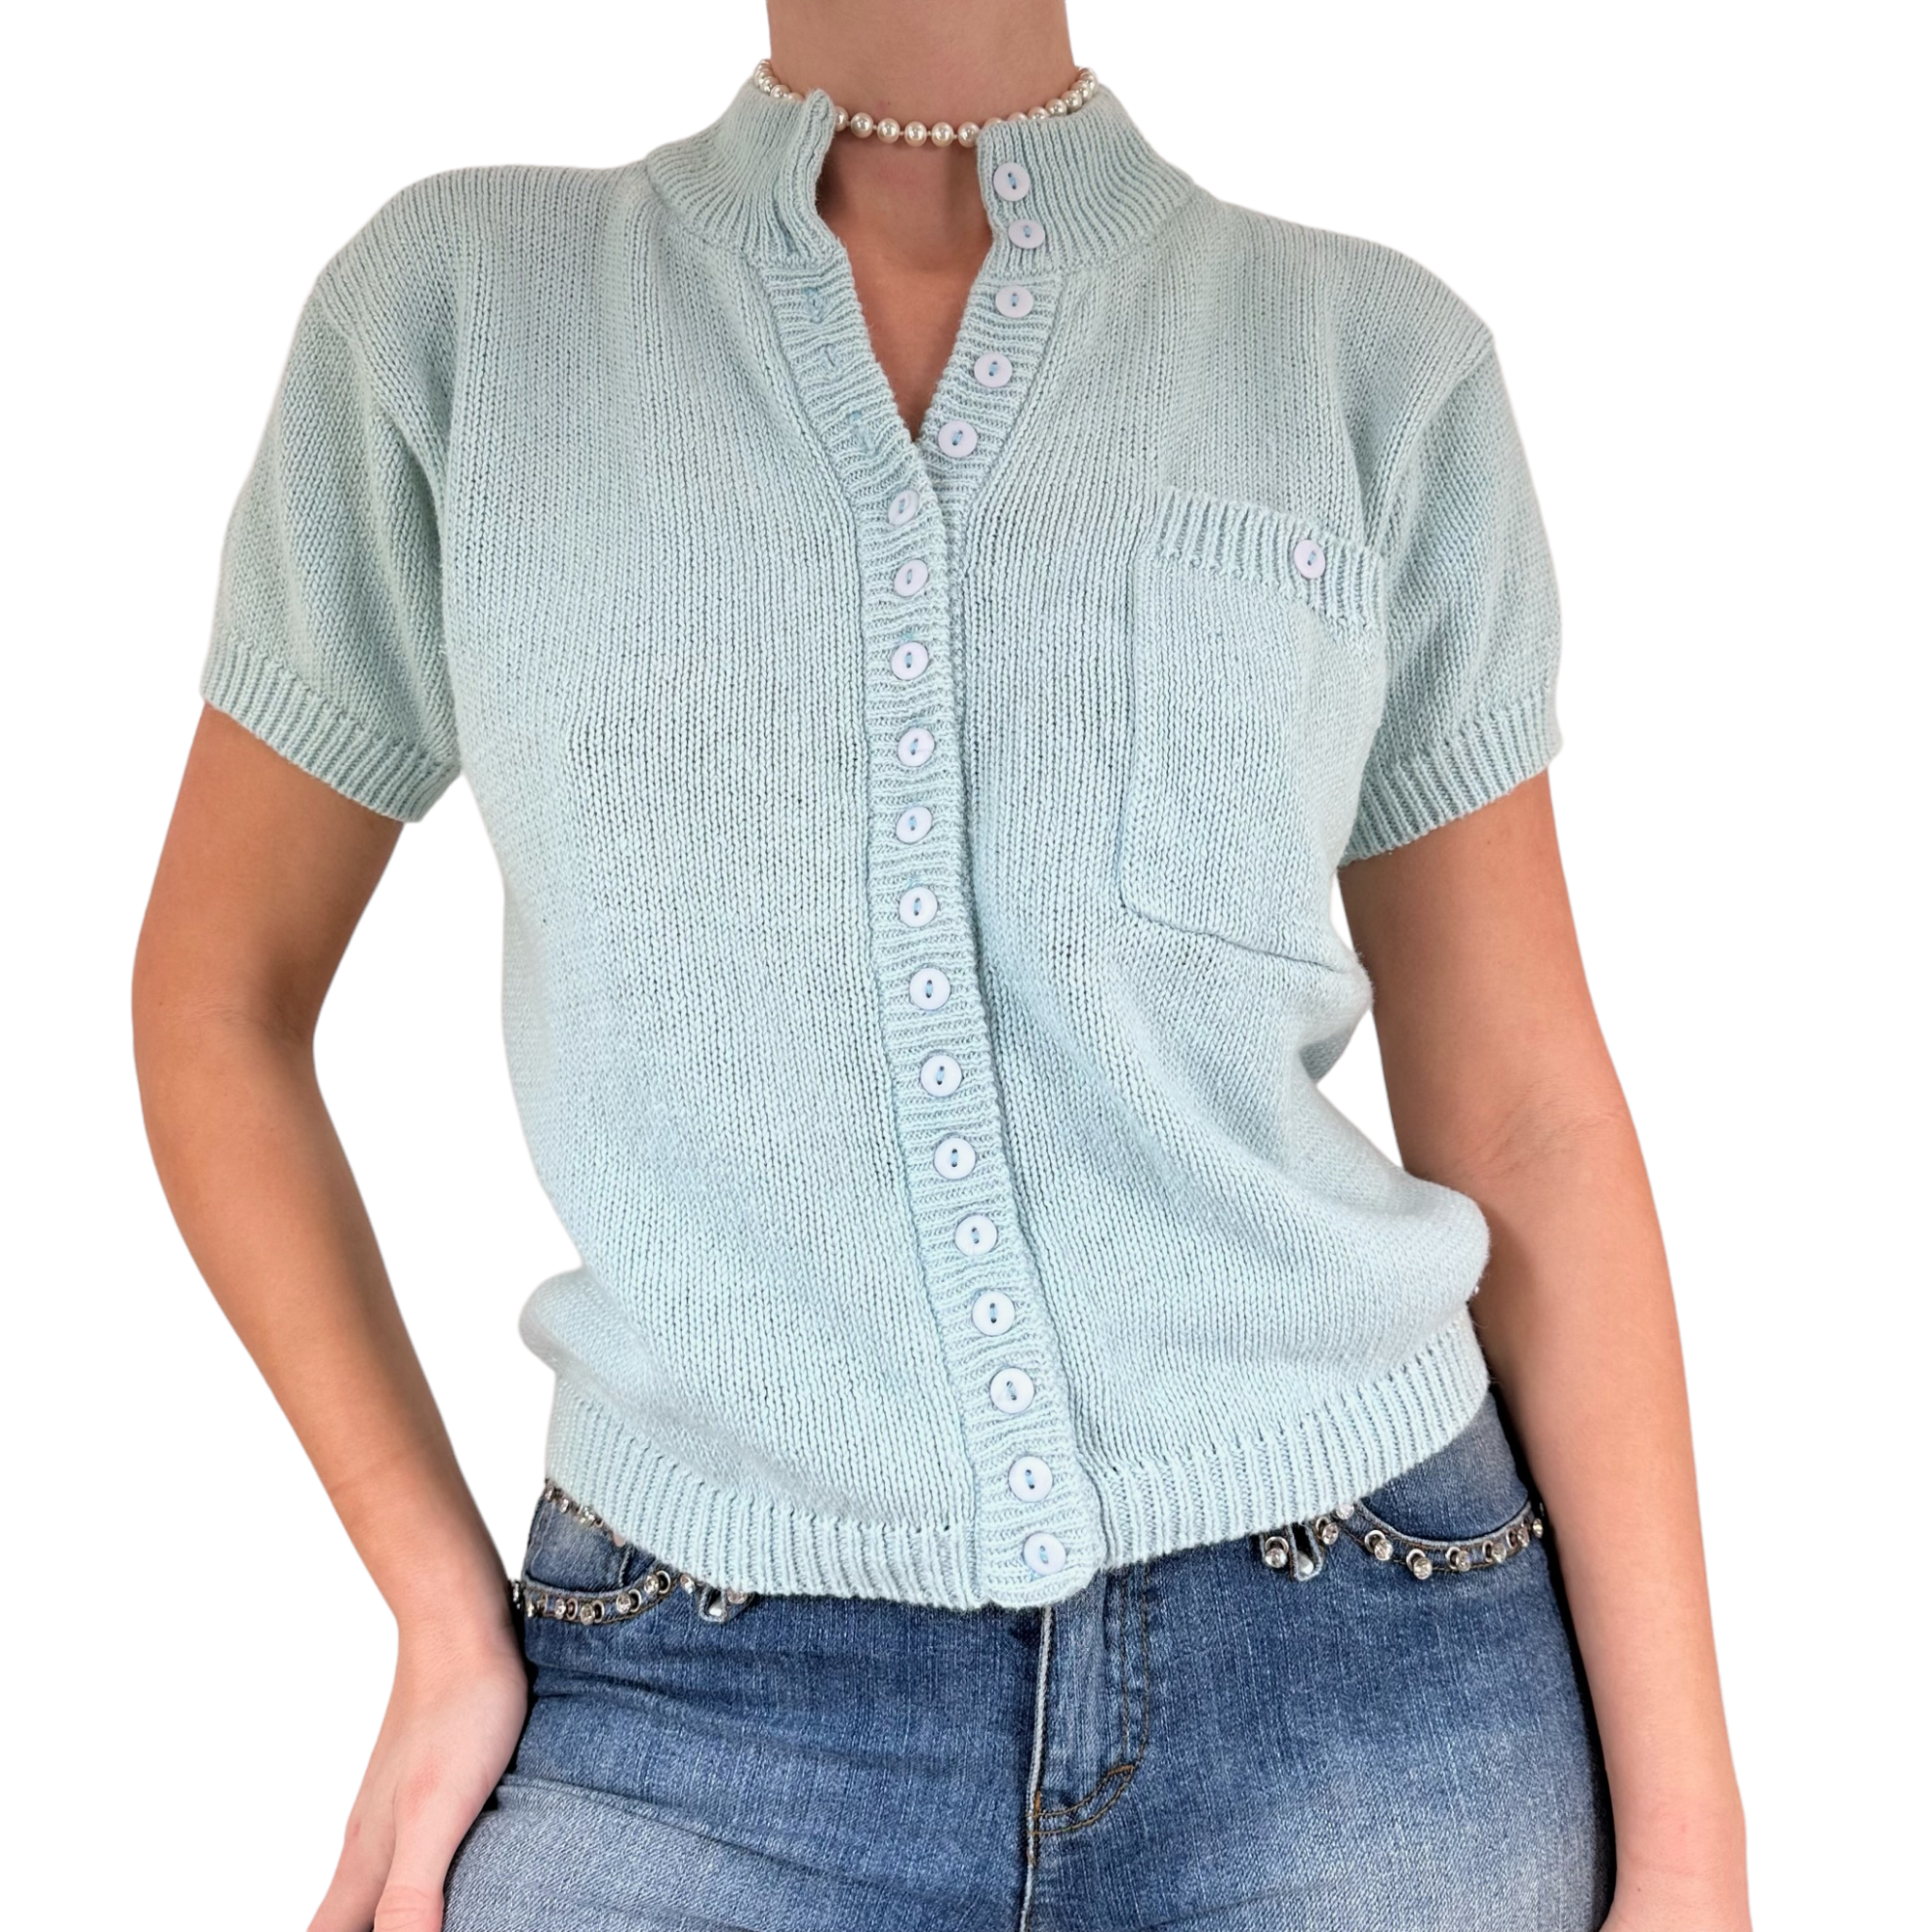 90s Vintage Knit Light Blue Button Up Short Sleeves Sweater Top [S]